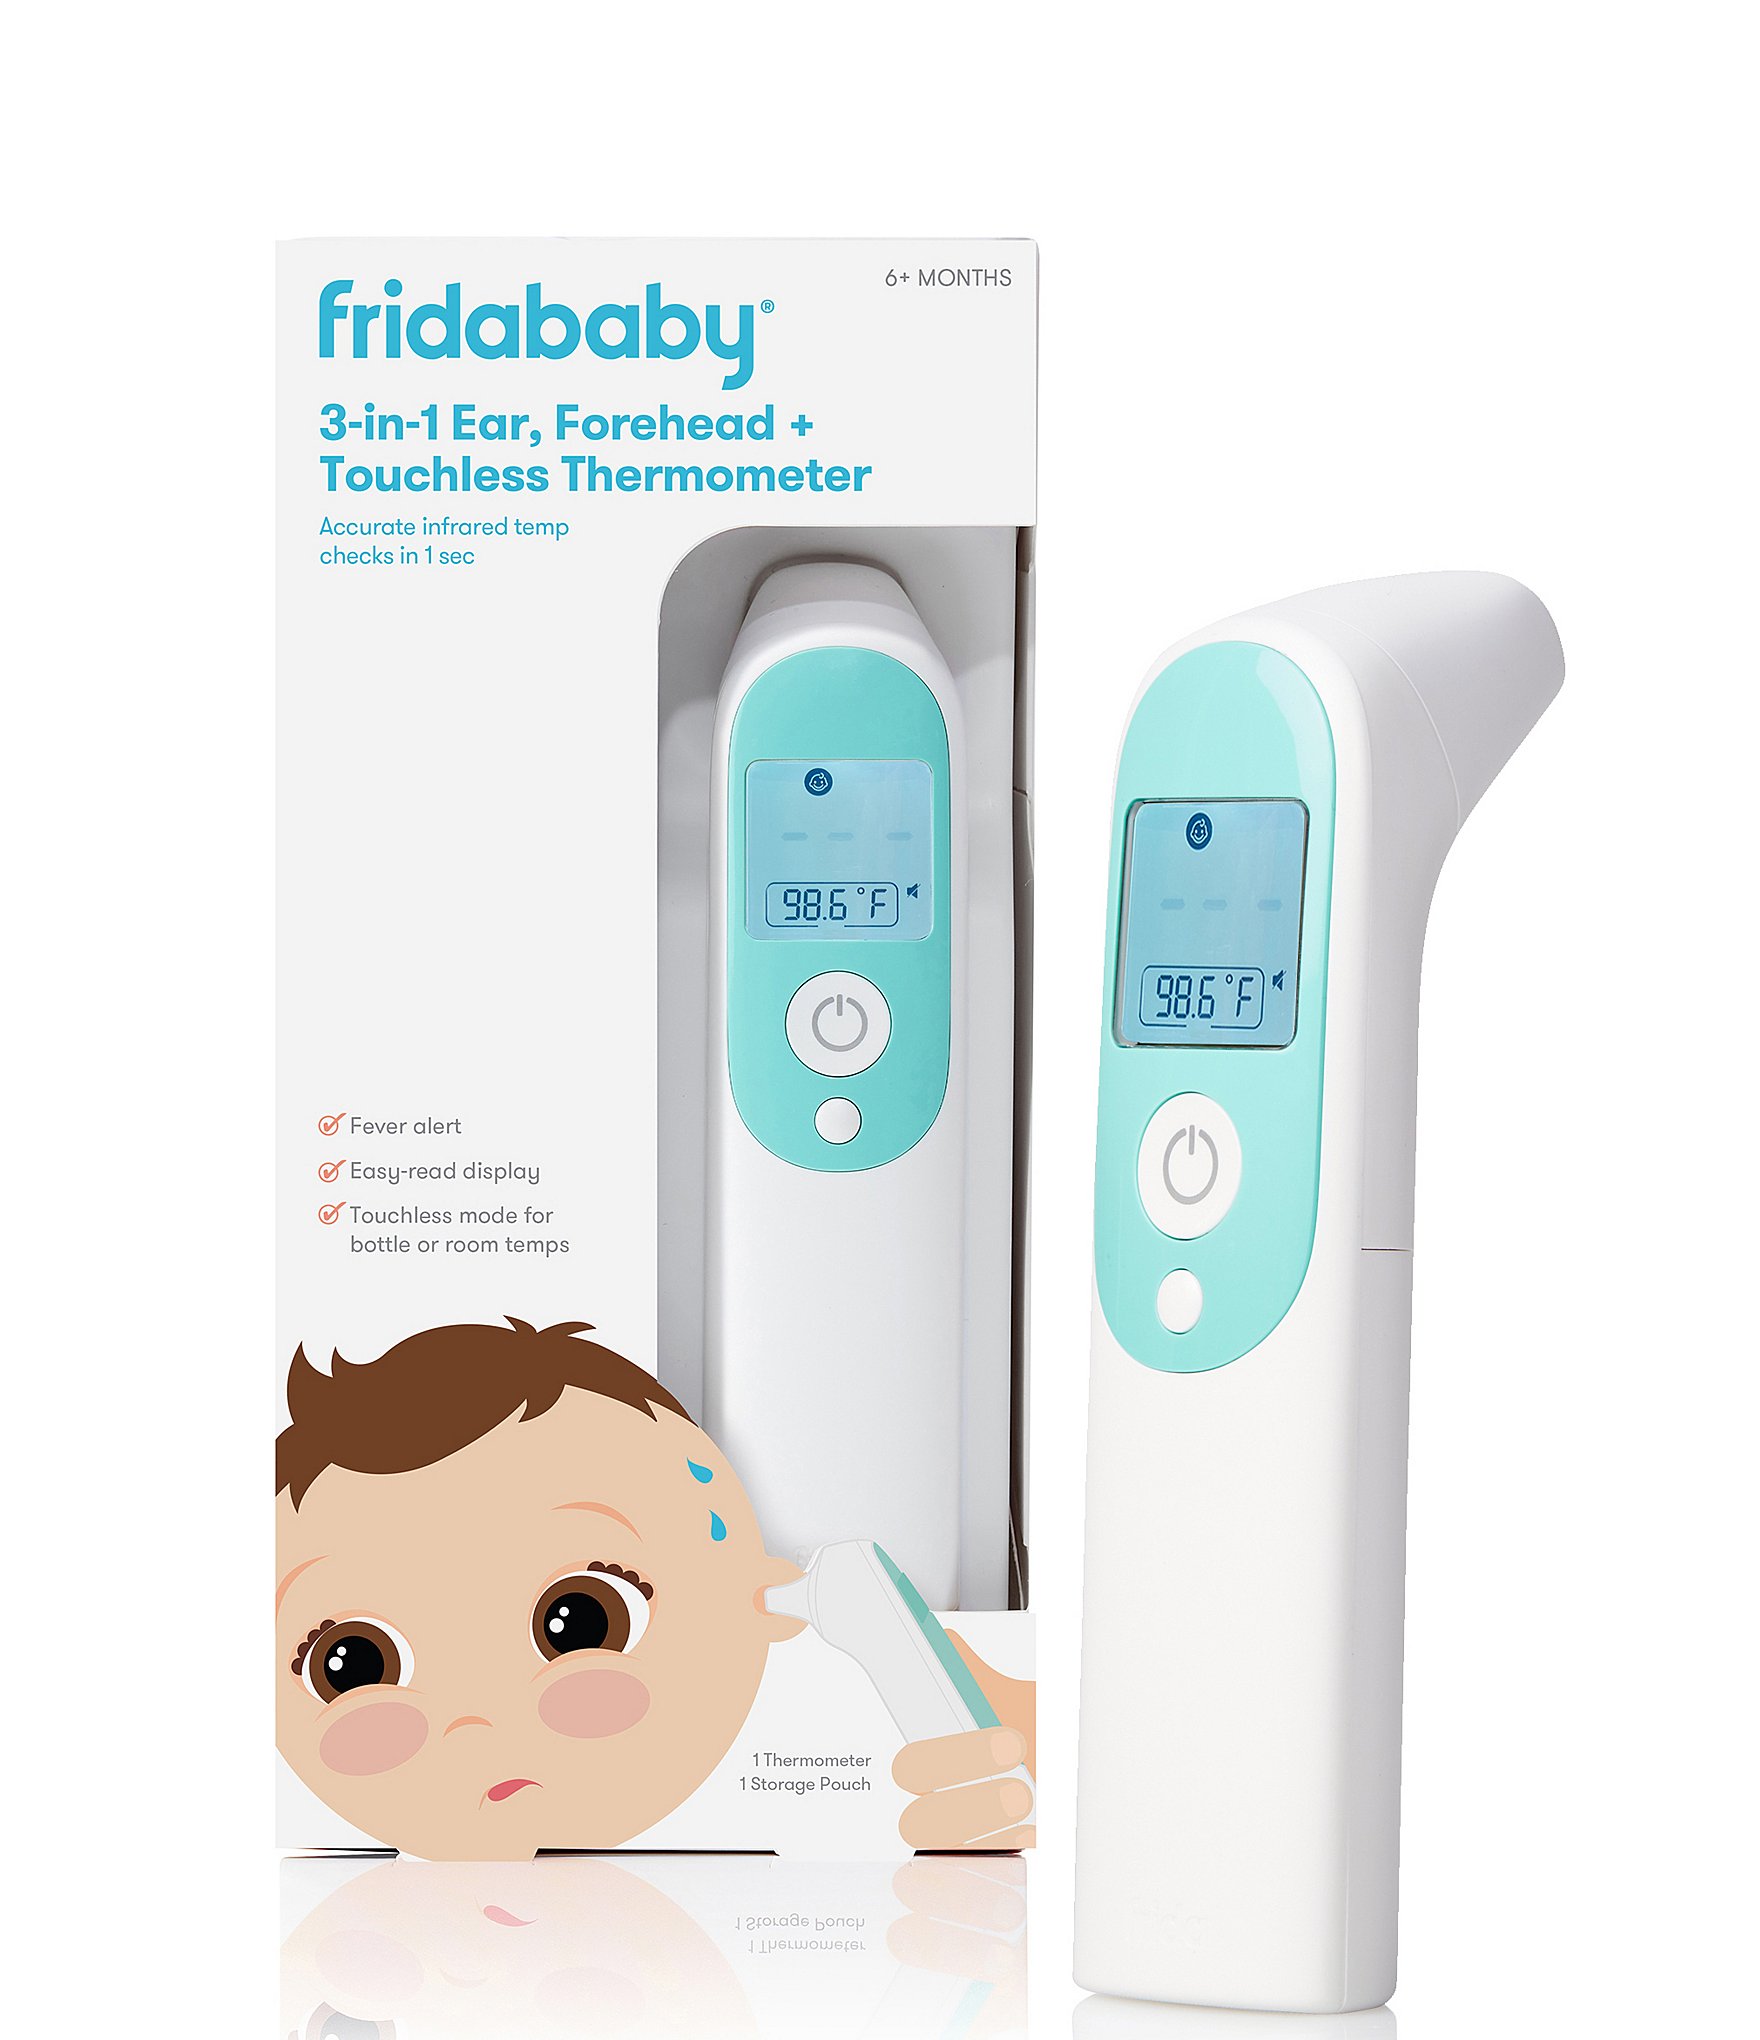 LOOKEE Petite Infrared Touchless Forehead Thermometer for Adults and Kids | Baby Thermometer with Fever Alarm | 3-in-1 No Touch Medical Digital